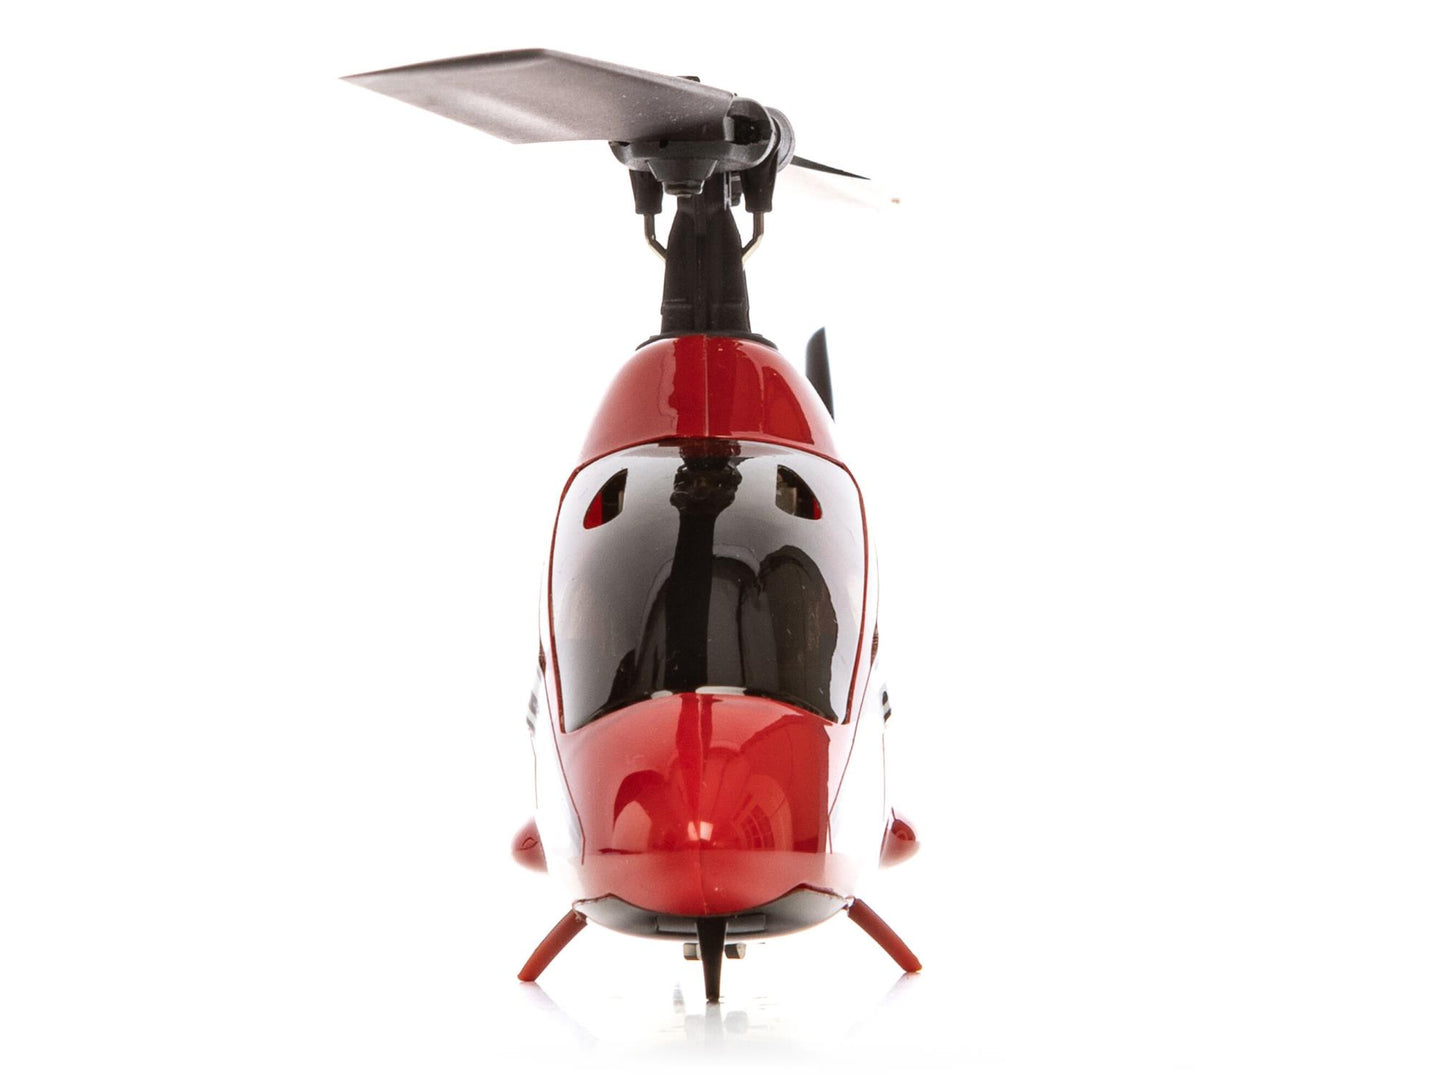 Blade 150 FX RTF RC Helicopter